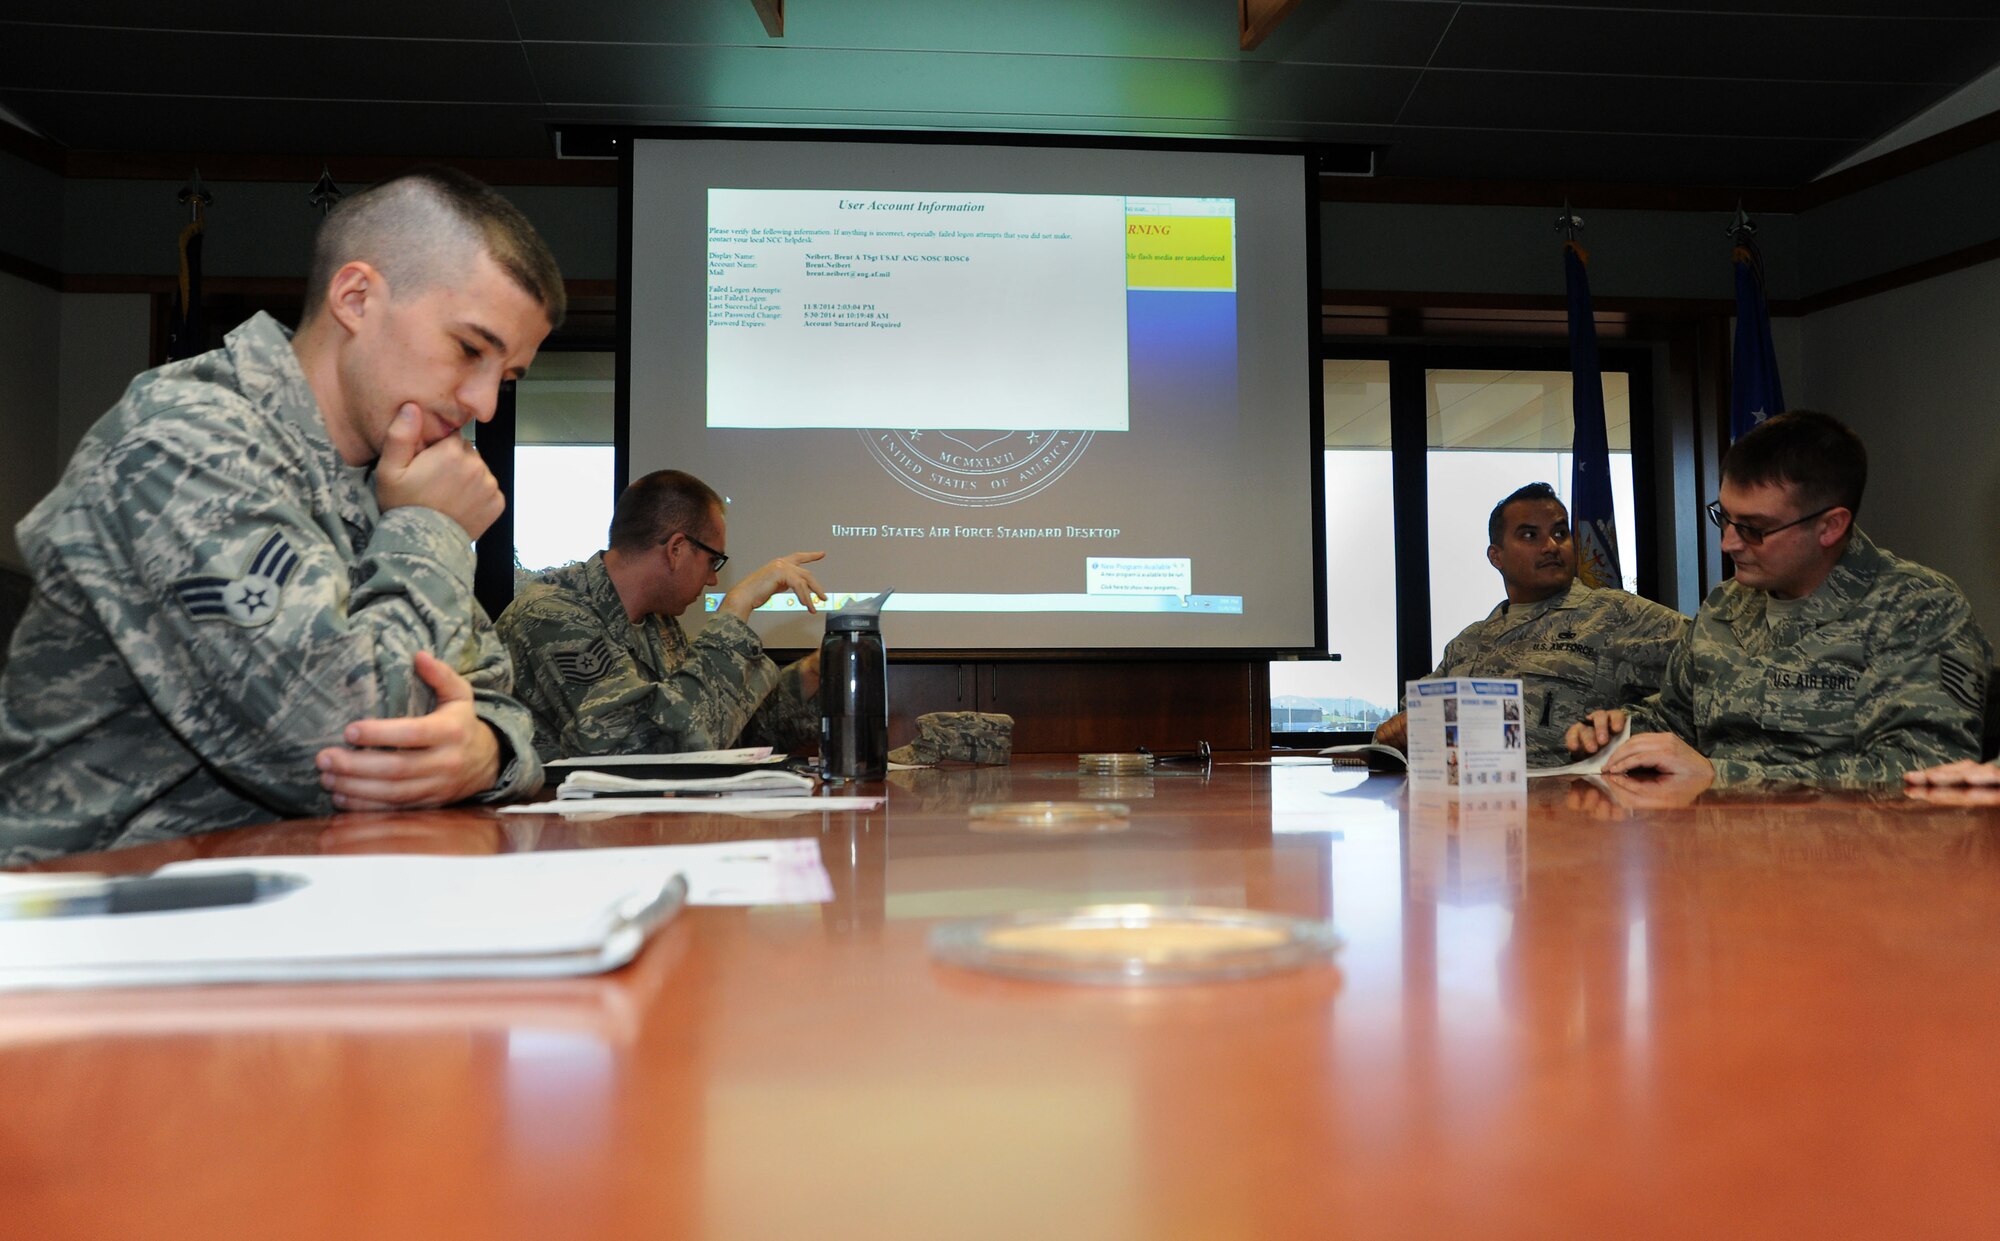 Senior Airman Miles Dodge, left, participates in the Junior Enlisted Council meeting taking place on Nov. 8, 2014, Portland Air National Guard Base, Ore. (U.S. Air National Guard photo by Staff Sgt. Brandon Boyd)